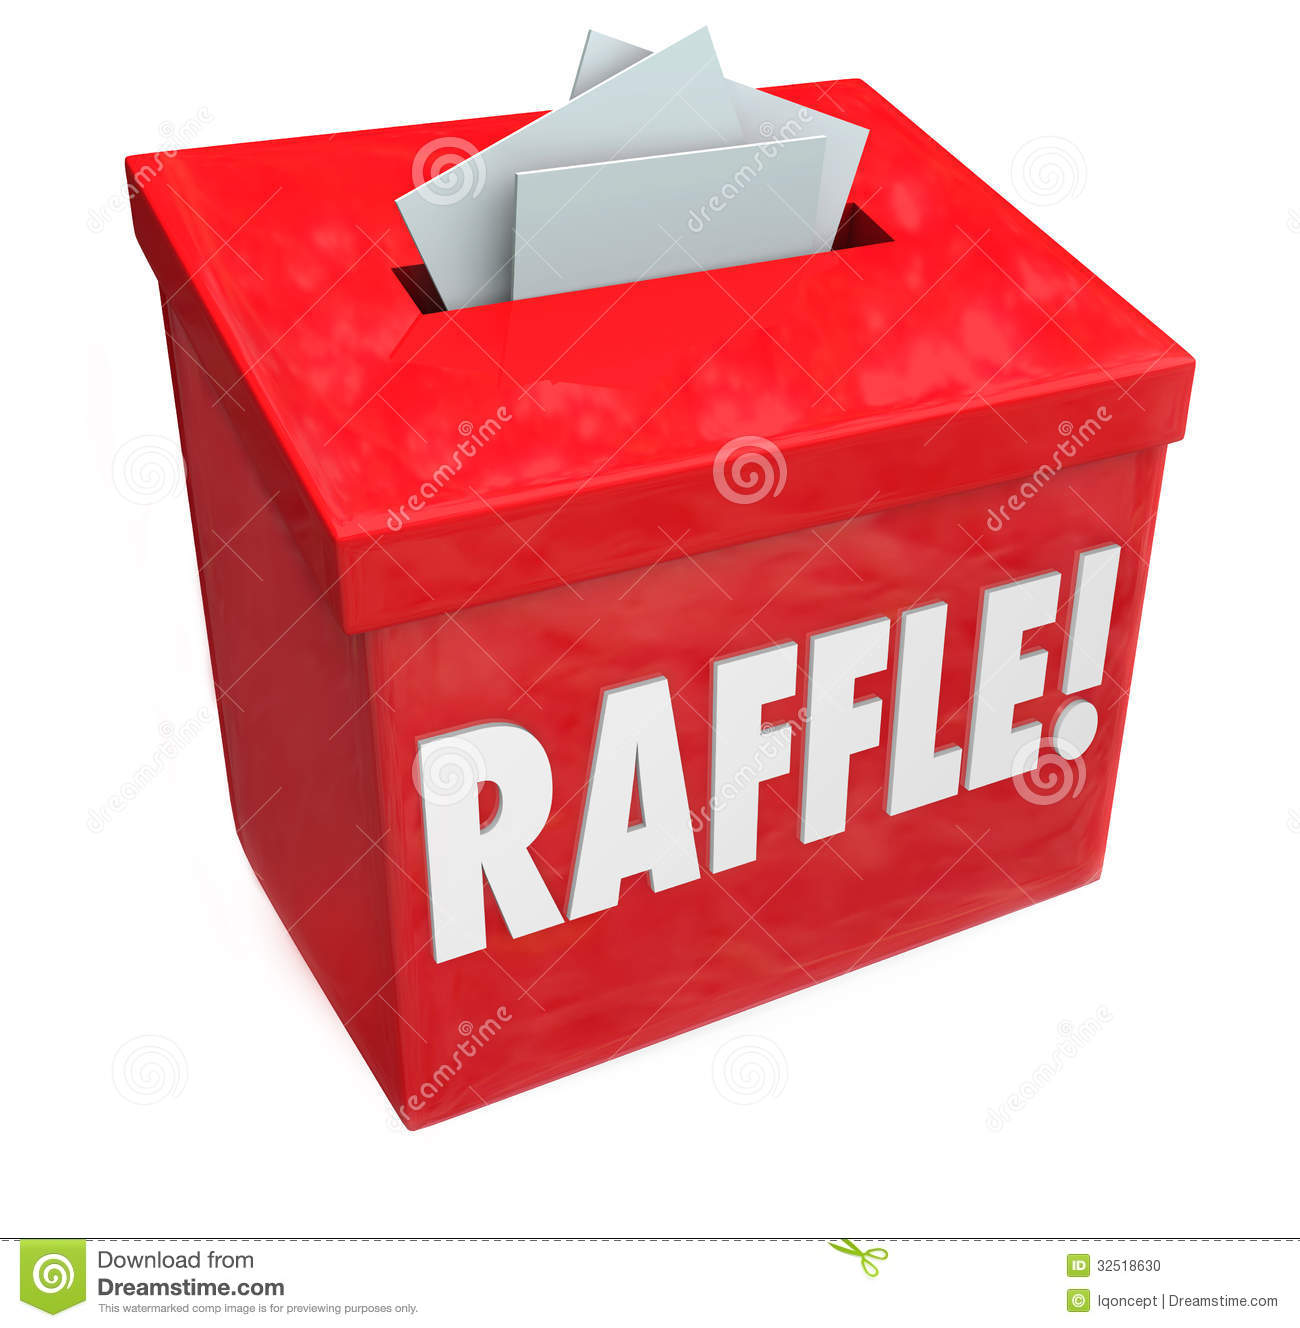 50 50 Raffle Enter To Win Box Drop Your Tickets Stock Photo   Image